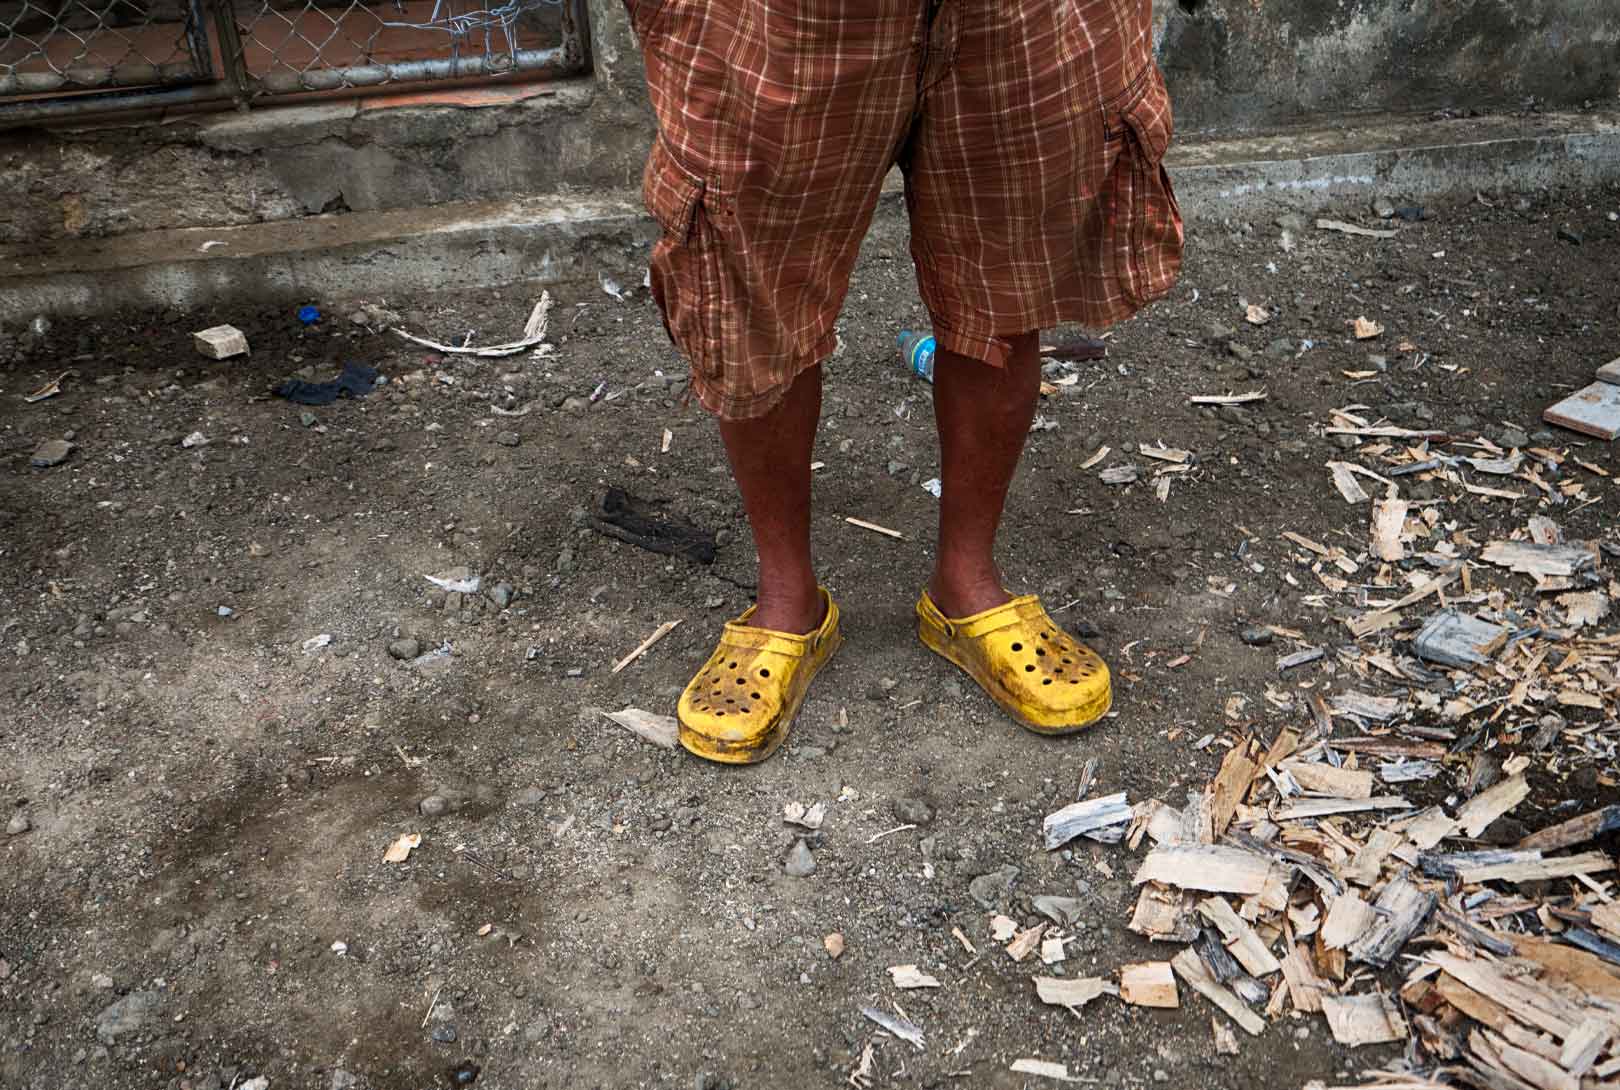 A Man In Brown Checkered Shorts With Bright Yellow Crocks